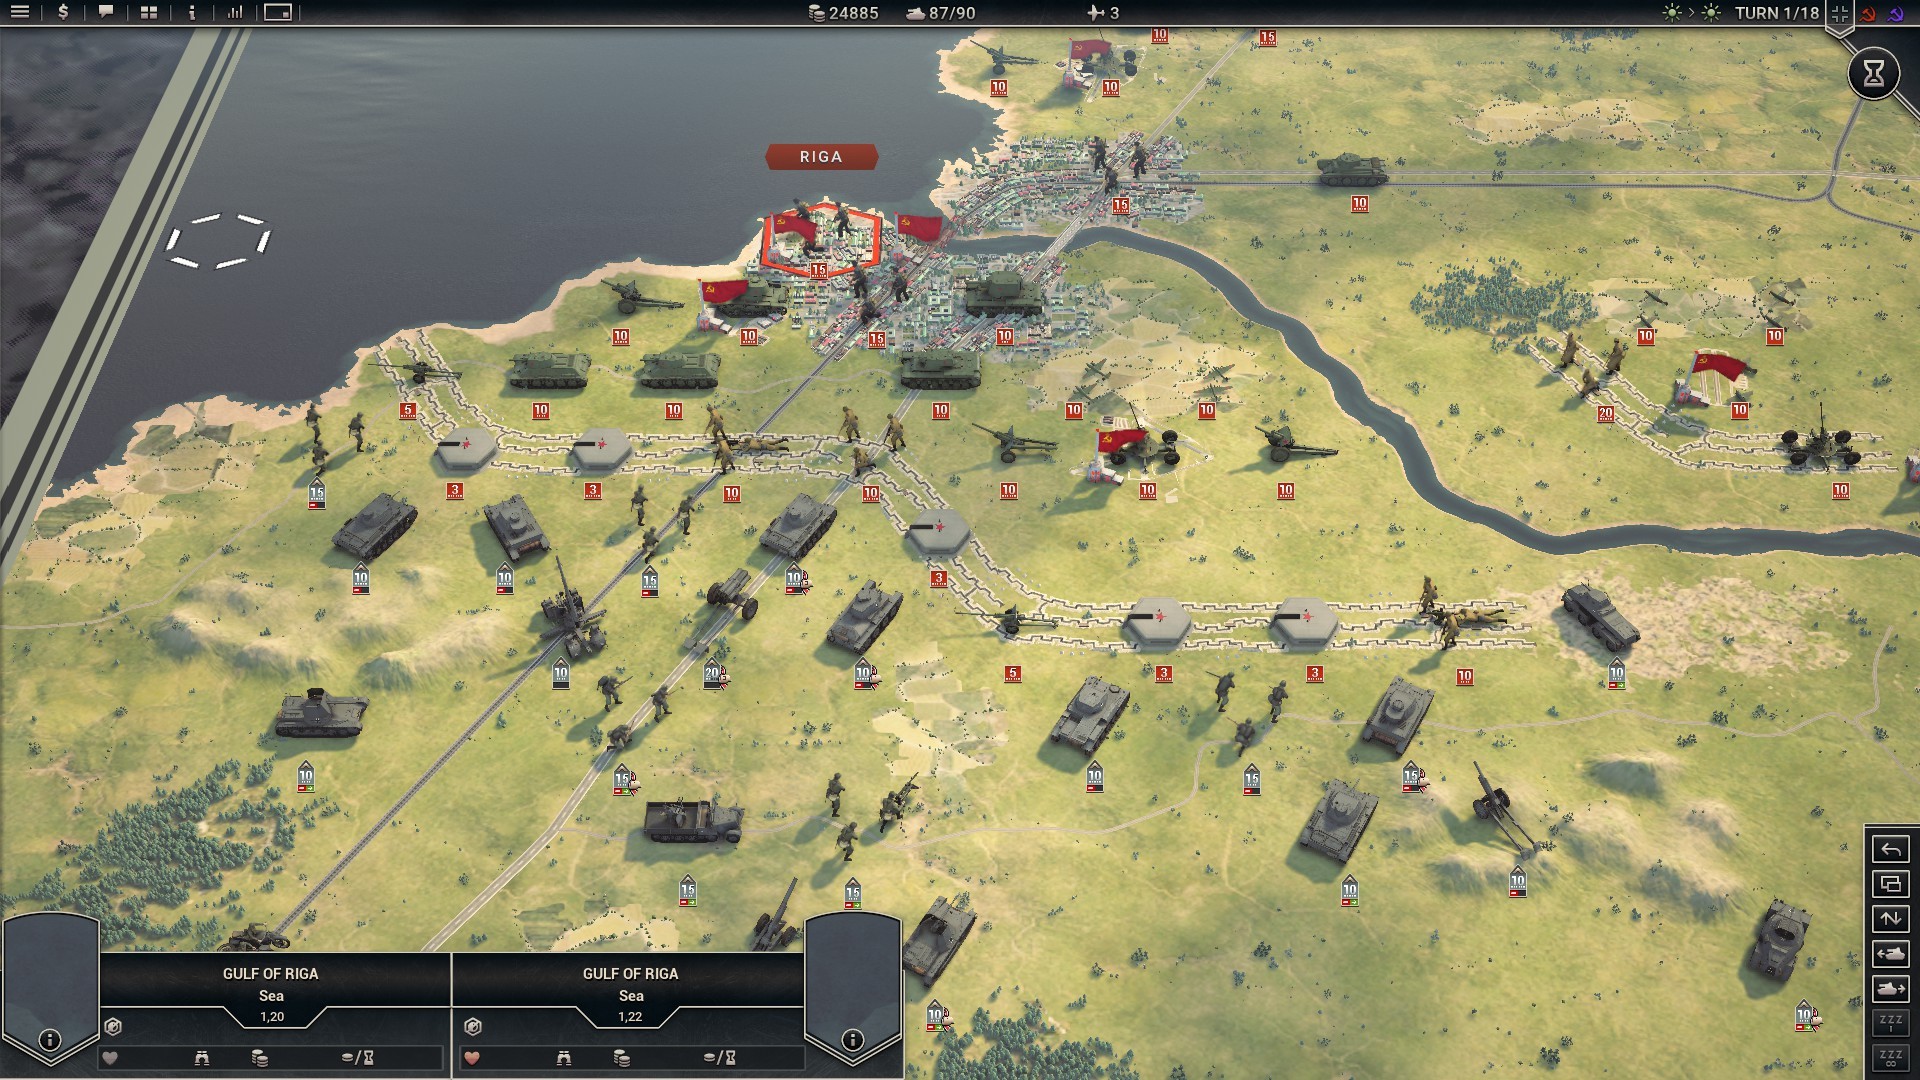 [$ 4.4] Panzer Corps 2 - Axis Operations 1941 DLC Steam CD Key